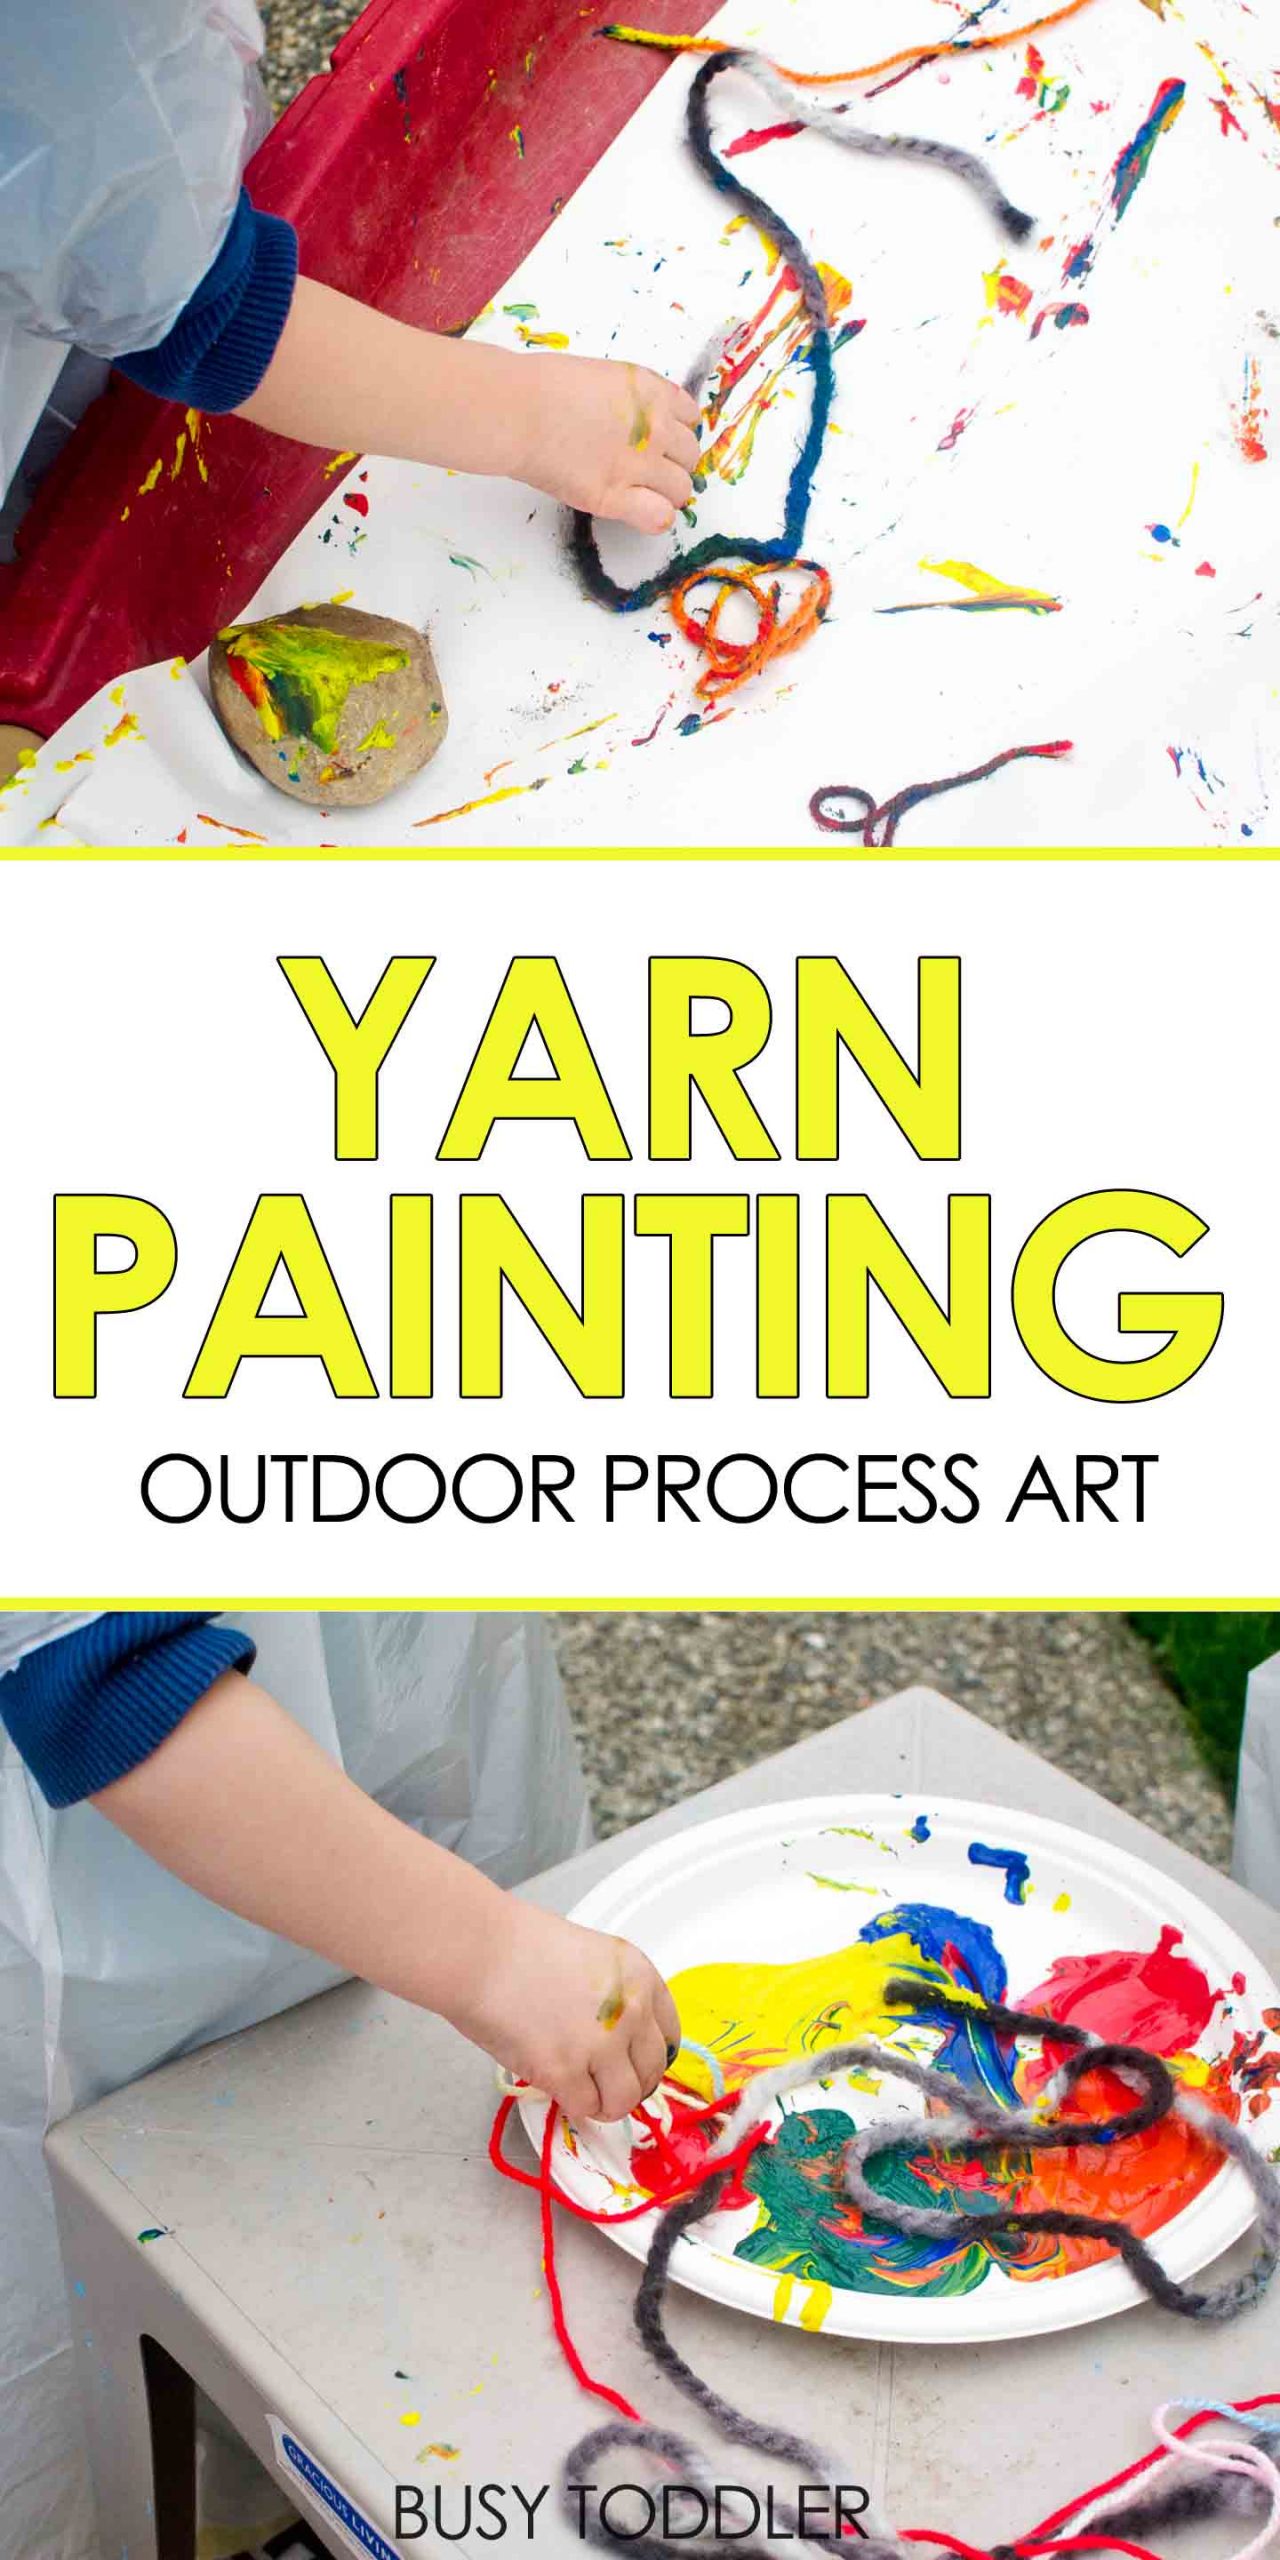 Fun Art Projects For Preschoolers
 Yarn Painting Outdoor Process Art Busy Toddler